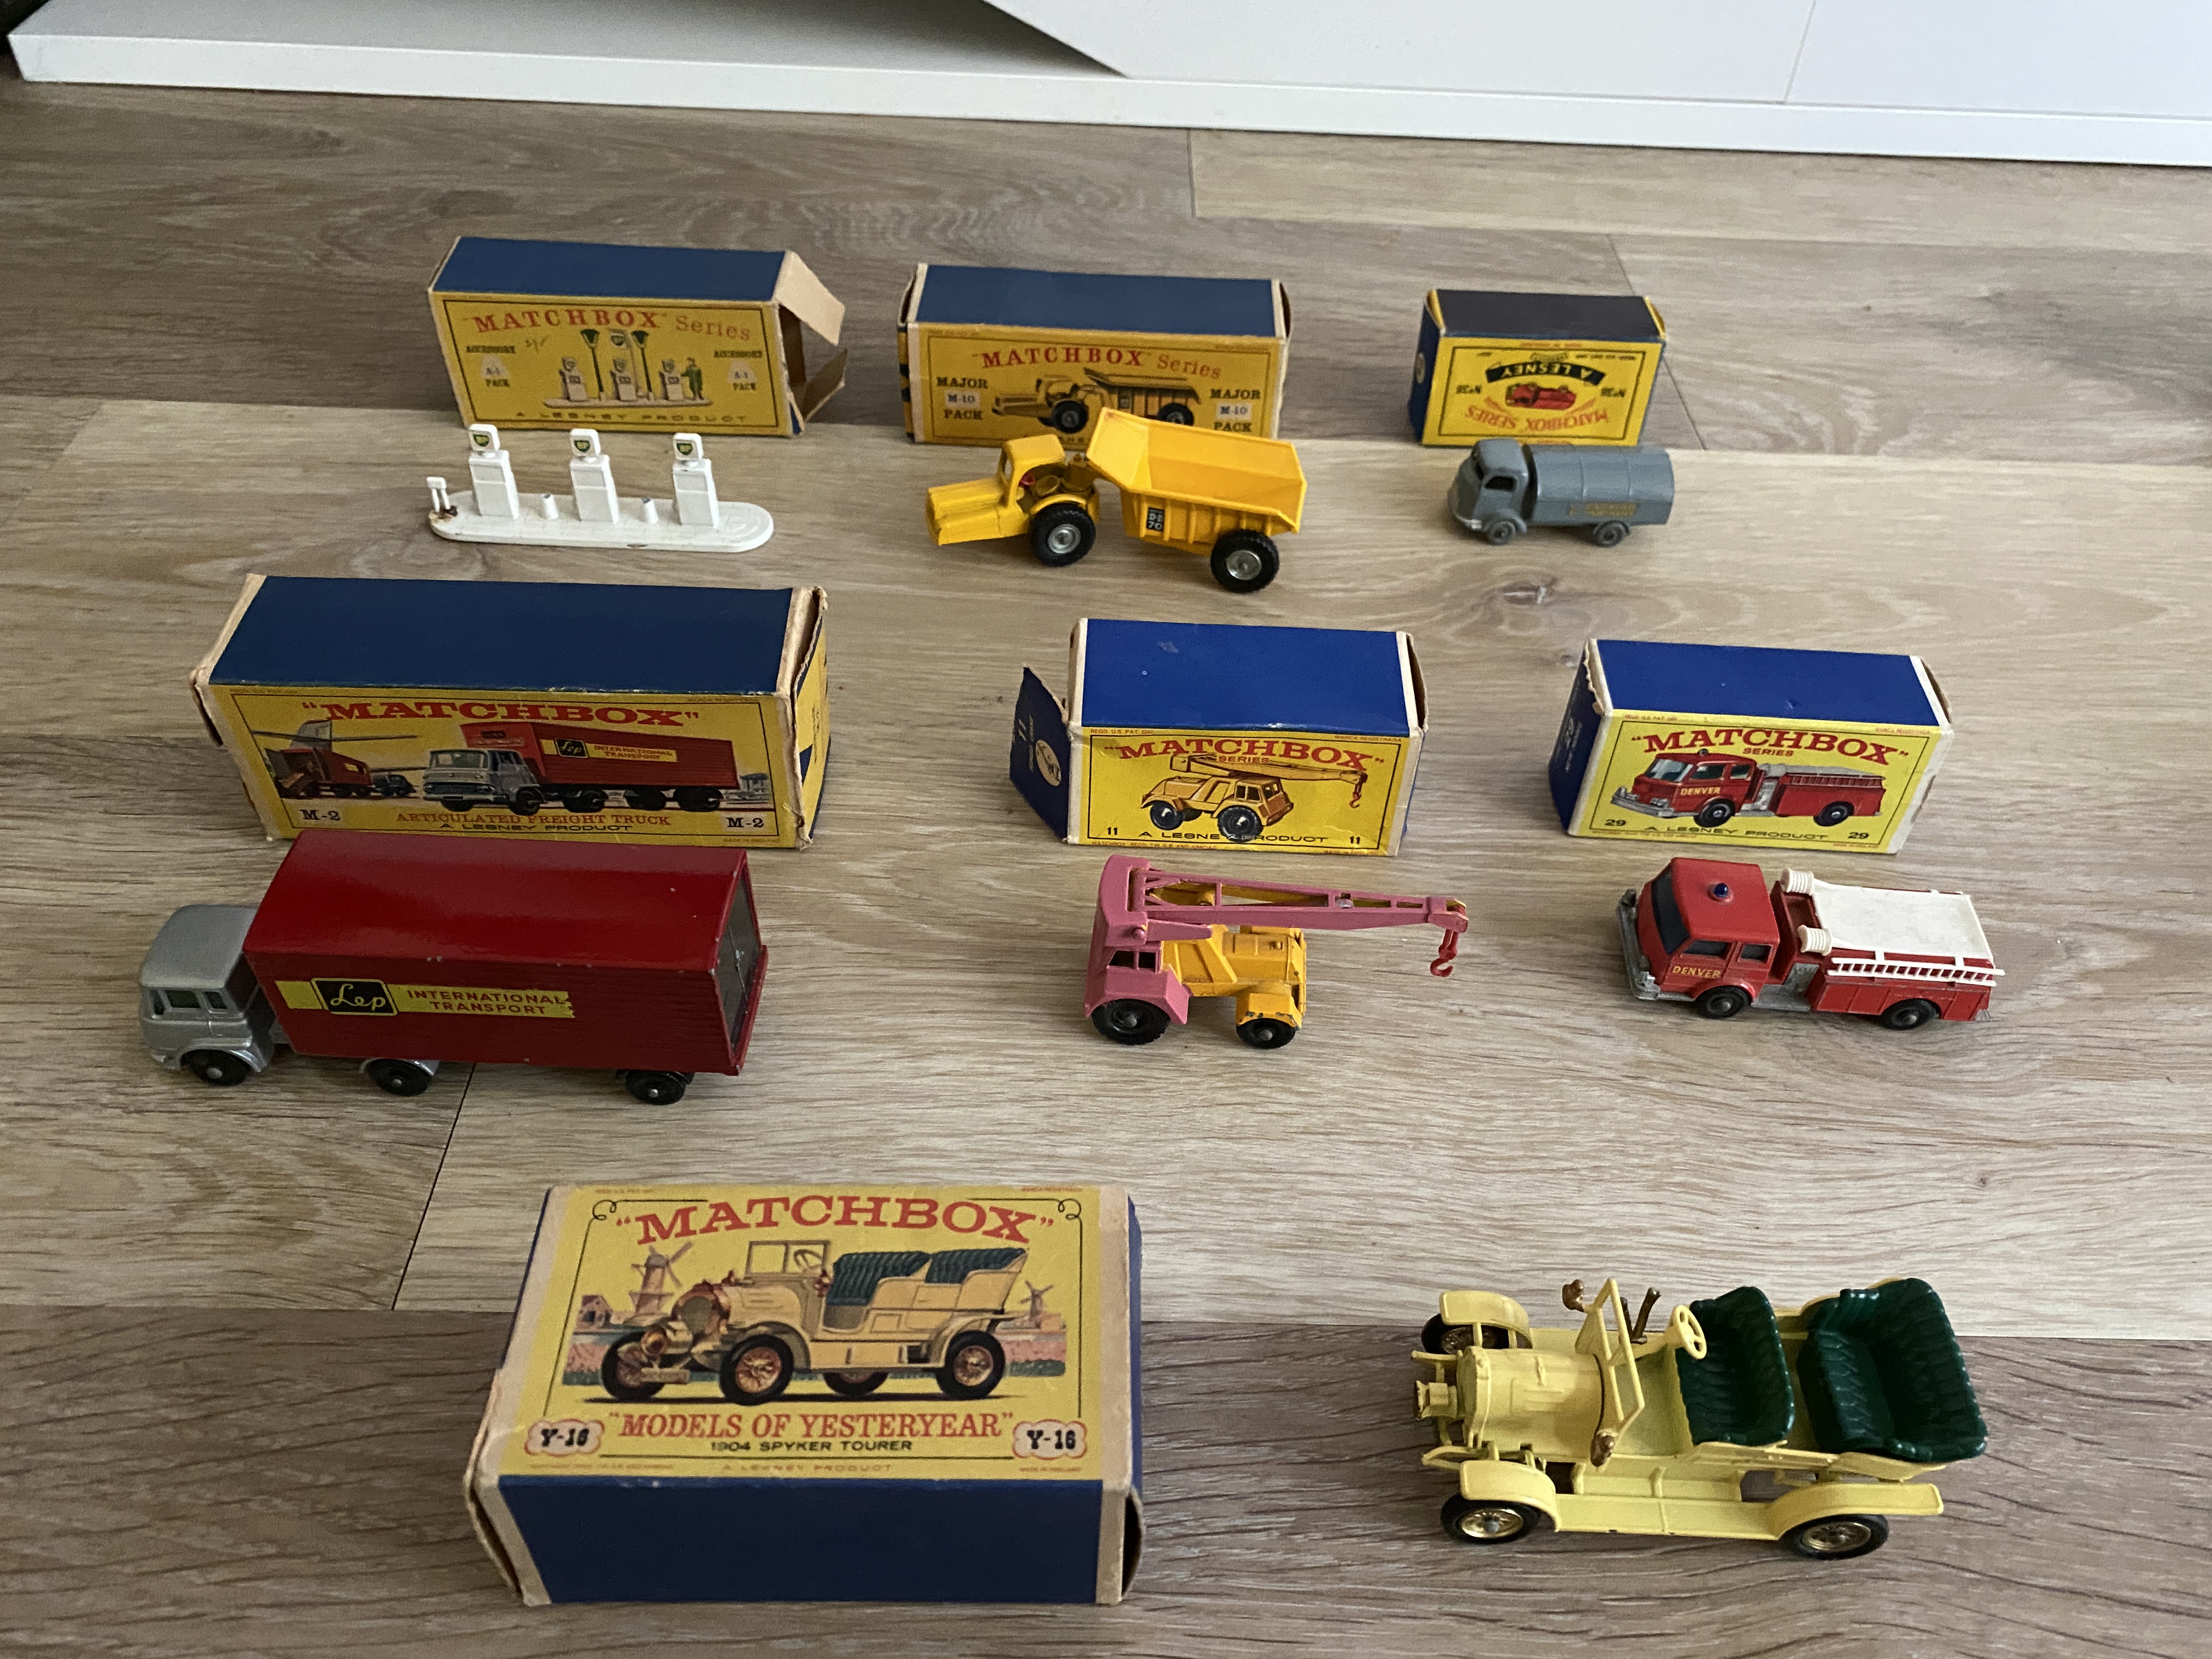 Boxed Vintage Matchbox Toy Models, good condition - Image 2 of 10